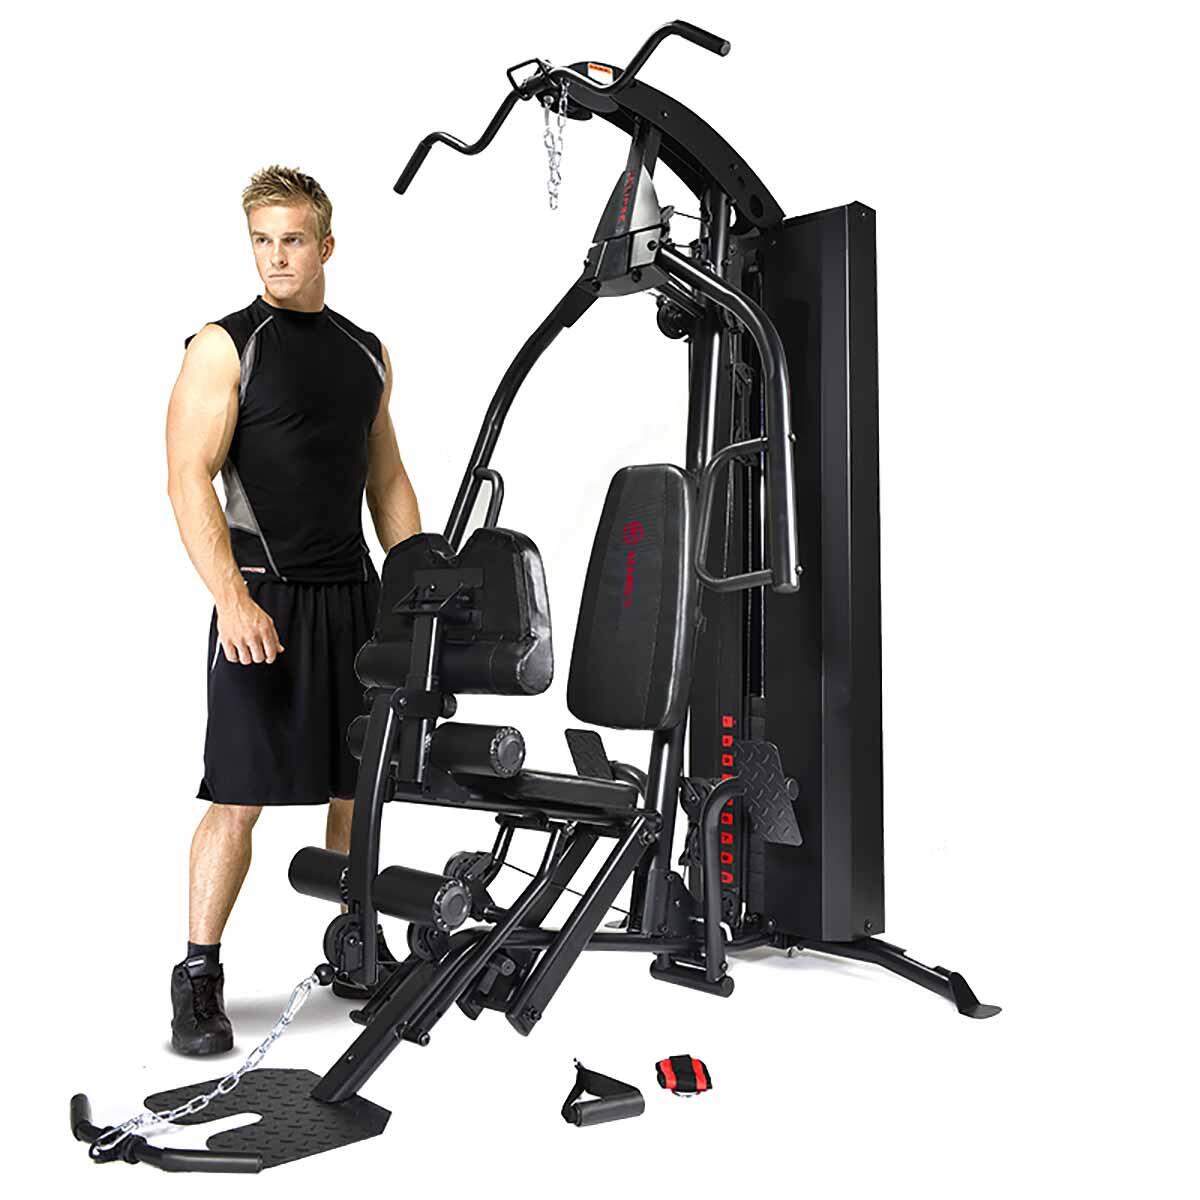 MARCY MARCY ECLIPSE HG7000 HOME MULTI GYM WITH INTEGRATED LEG PRESS